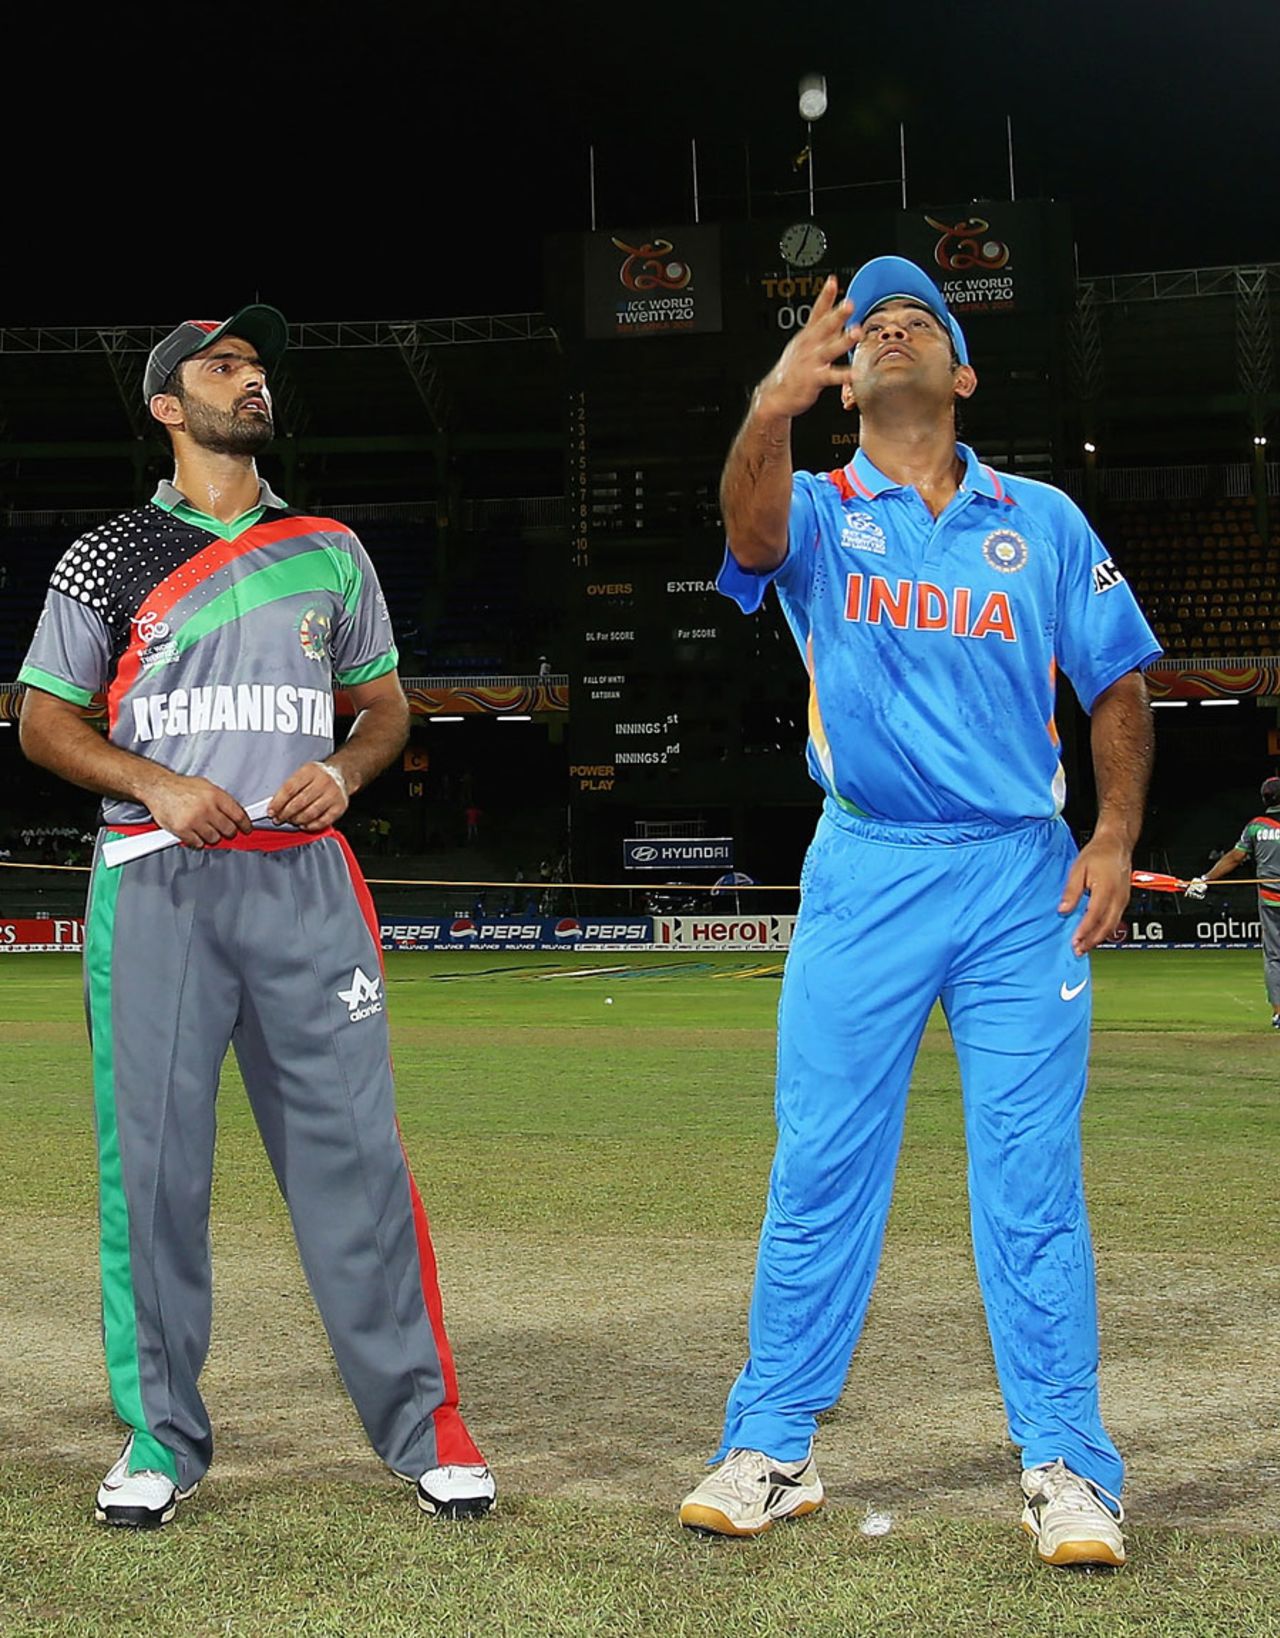 Afghanistan captain Nawroz Mangal won the toss and chose to bowl first, Afghanistan v India, World T20, Group A, Colombo, September, 19, 2012